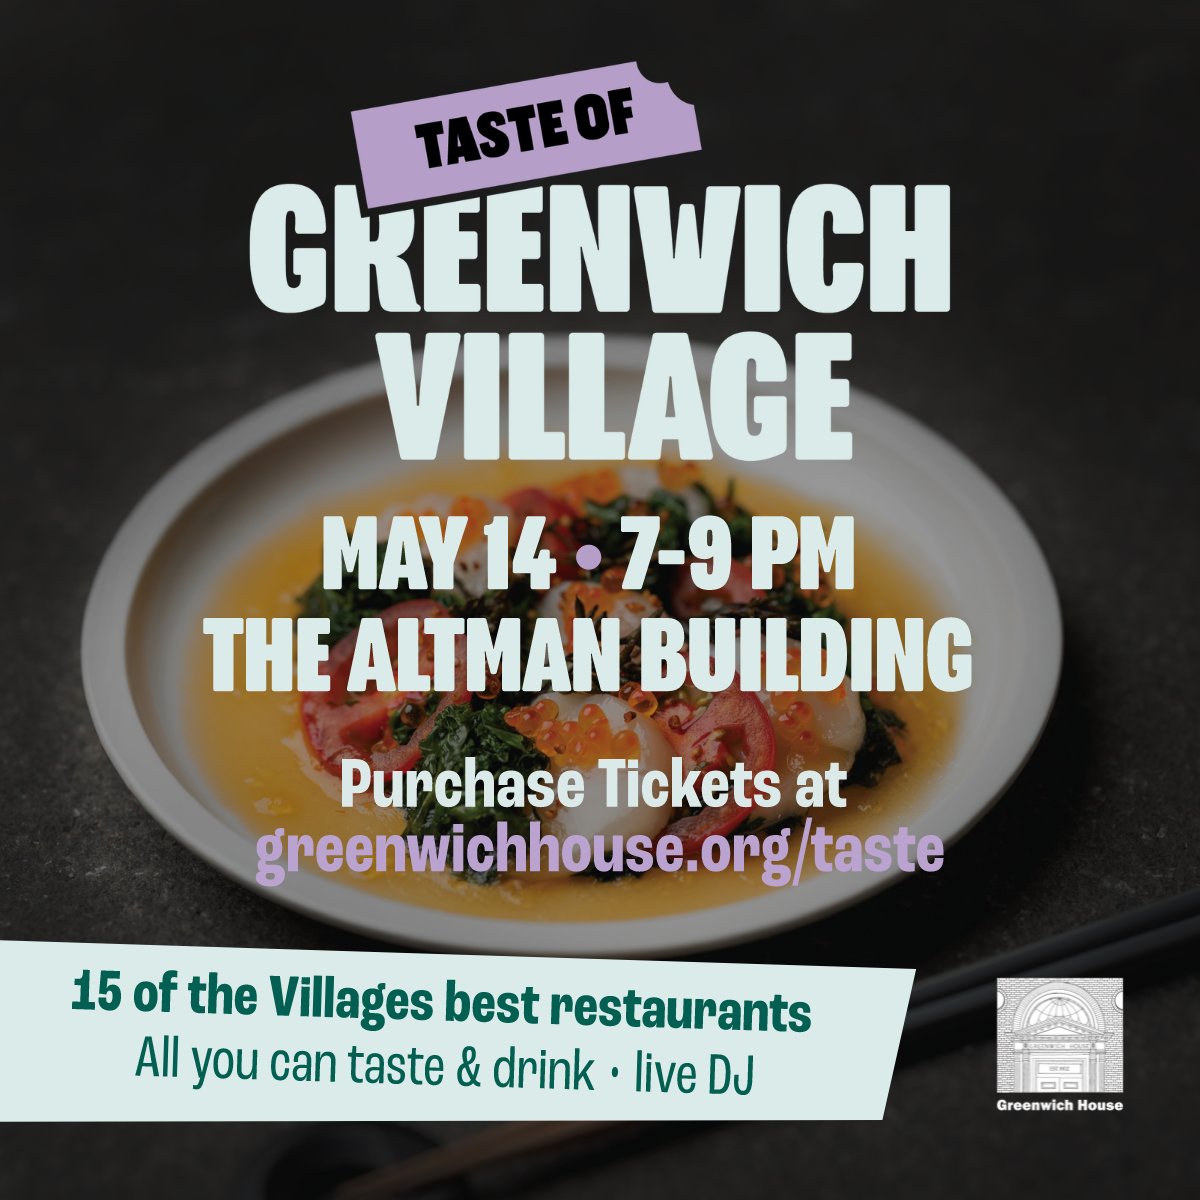 Join the 22nd annual Taste of Greenwich Village on May 14 at the Altman Building. Enjoy all-you-can-taste and drink from 15+ restaurants, supporting a great cause. Music by a DJ and a pottery sale will also be featured. Enter to win a pair of tickets! t.dostuffmedia.com/t/c/s/144510